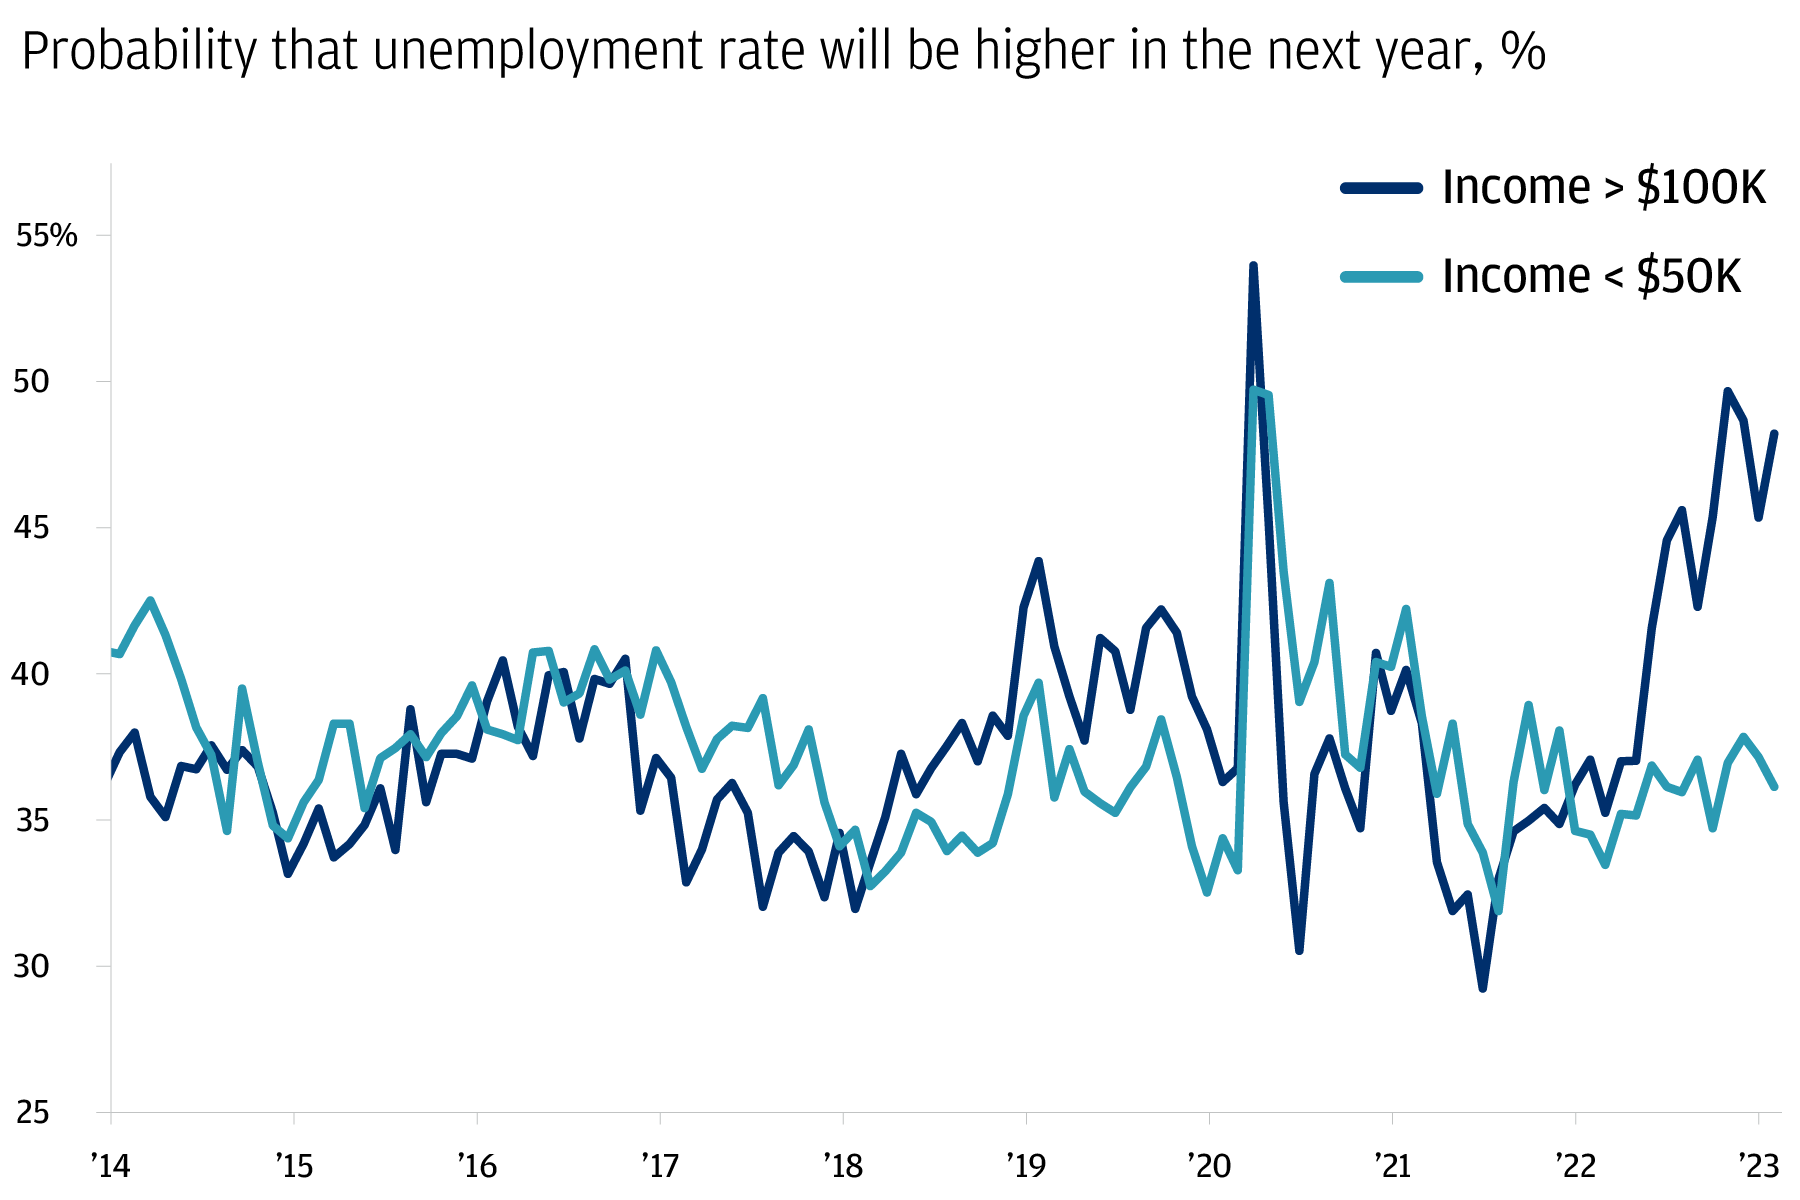 This chart describes the probability that unemployment rate will be higher in the next year since 2014 for workers with income greater than $100K and for workers with income less than $50K.